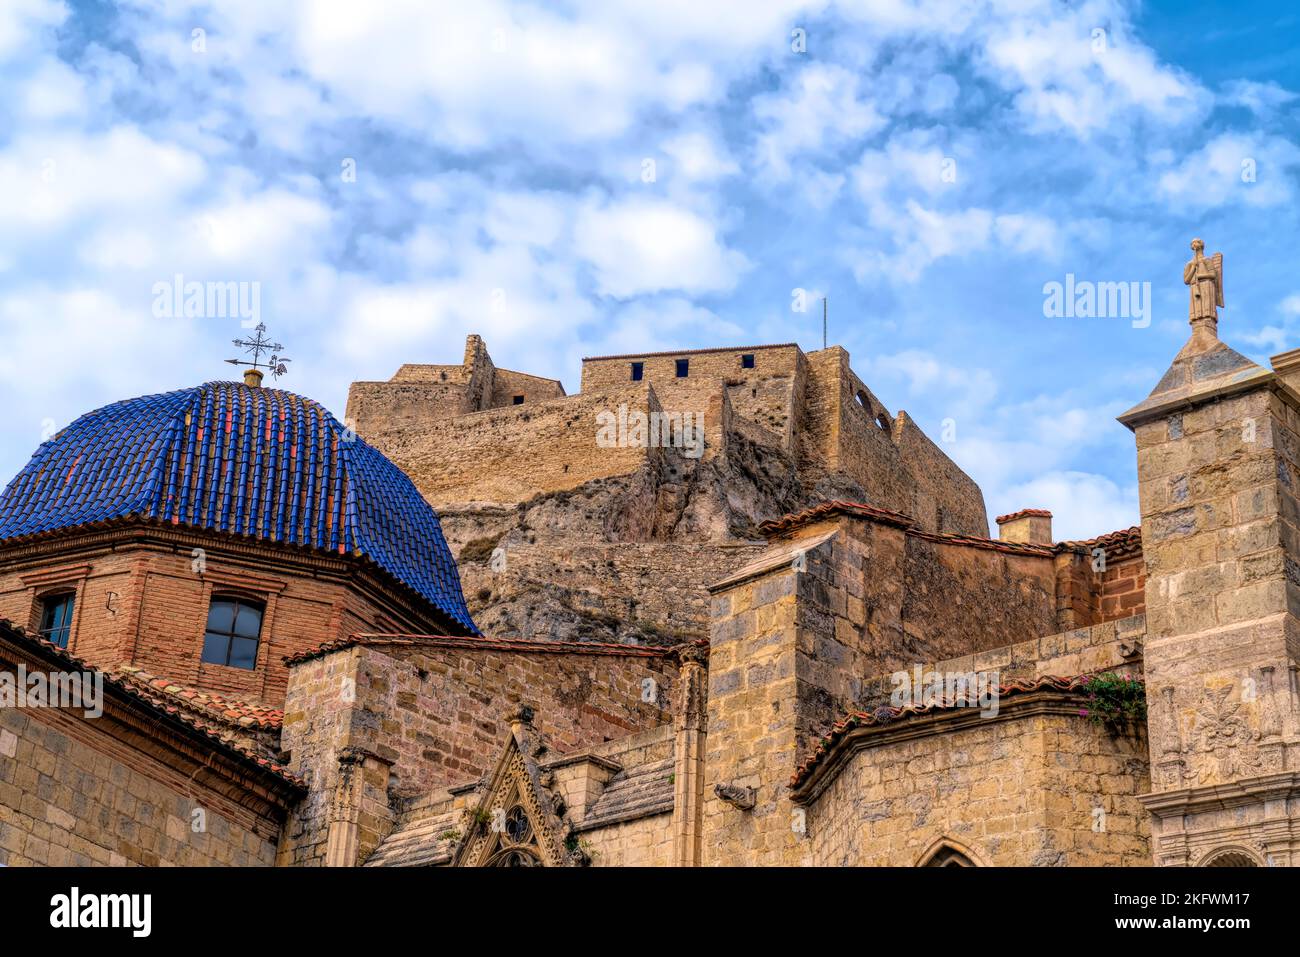 Blue dome roof church and castle Morella Spain historic medieval walled town Castellon province Valencian Community Stock Photo